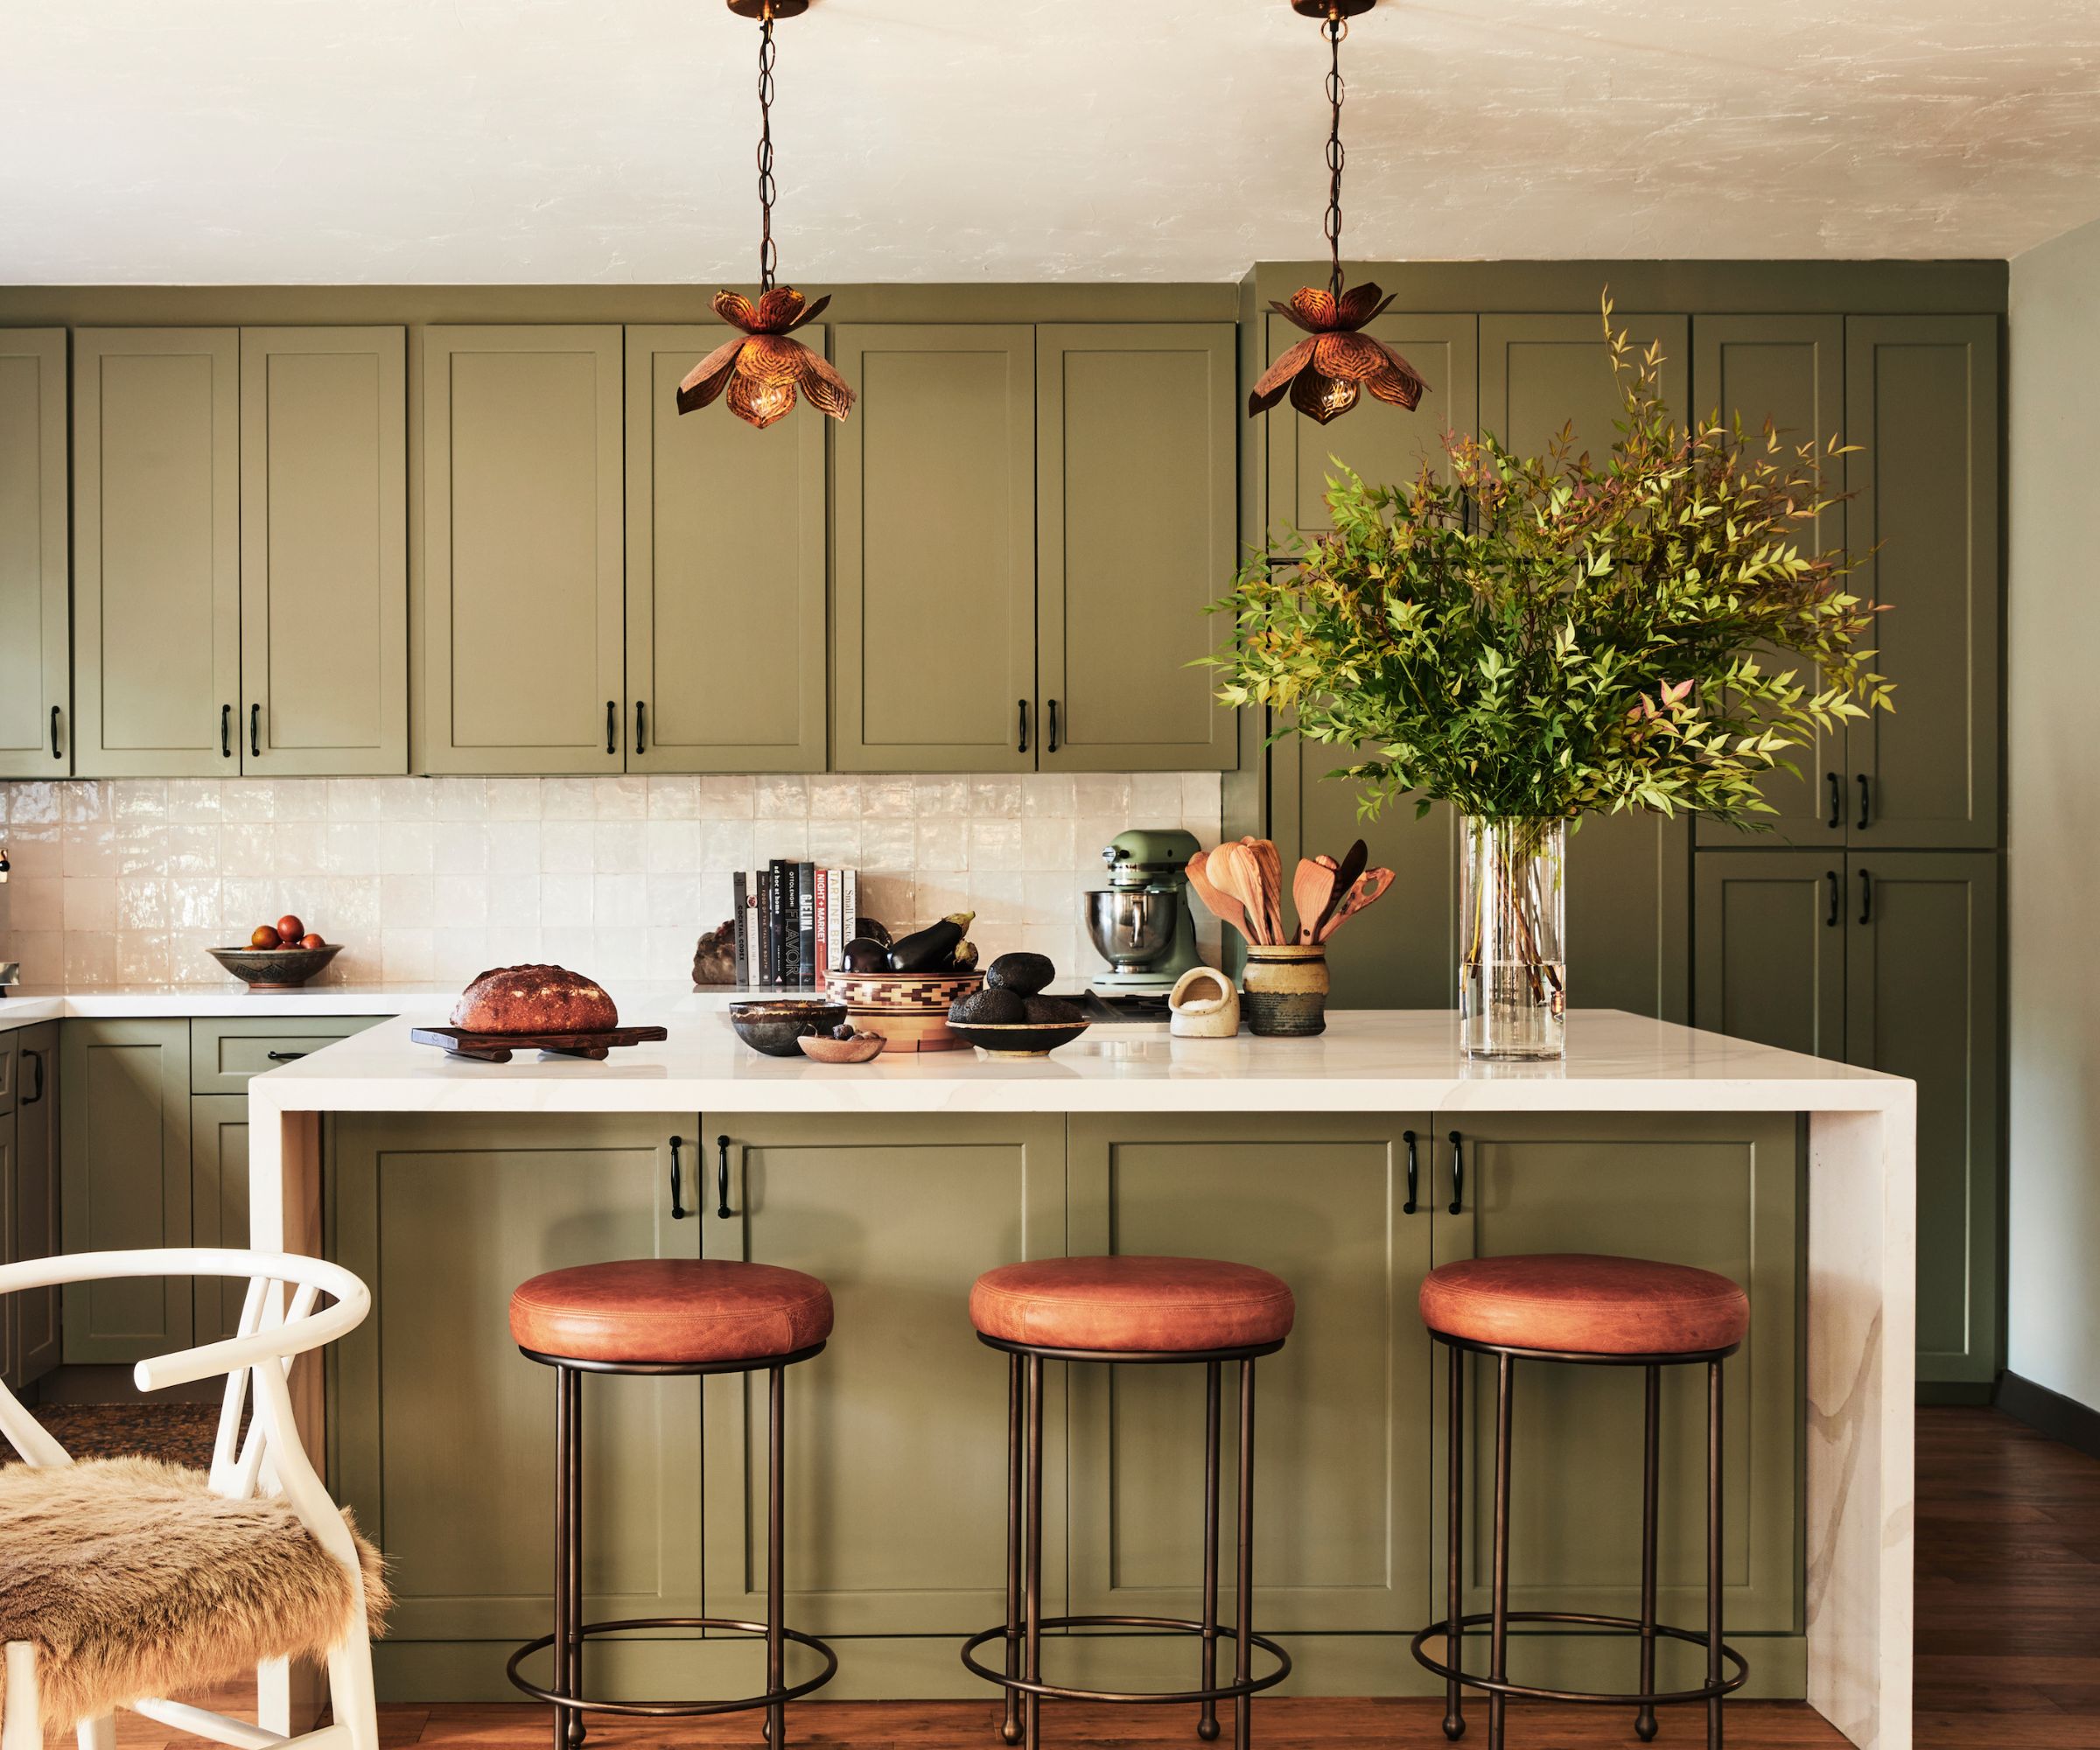 Olive green kitchen cabinets with wood details